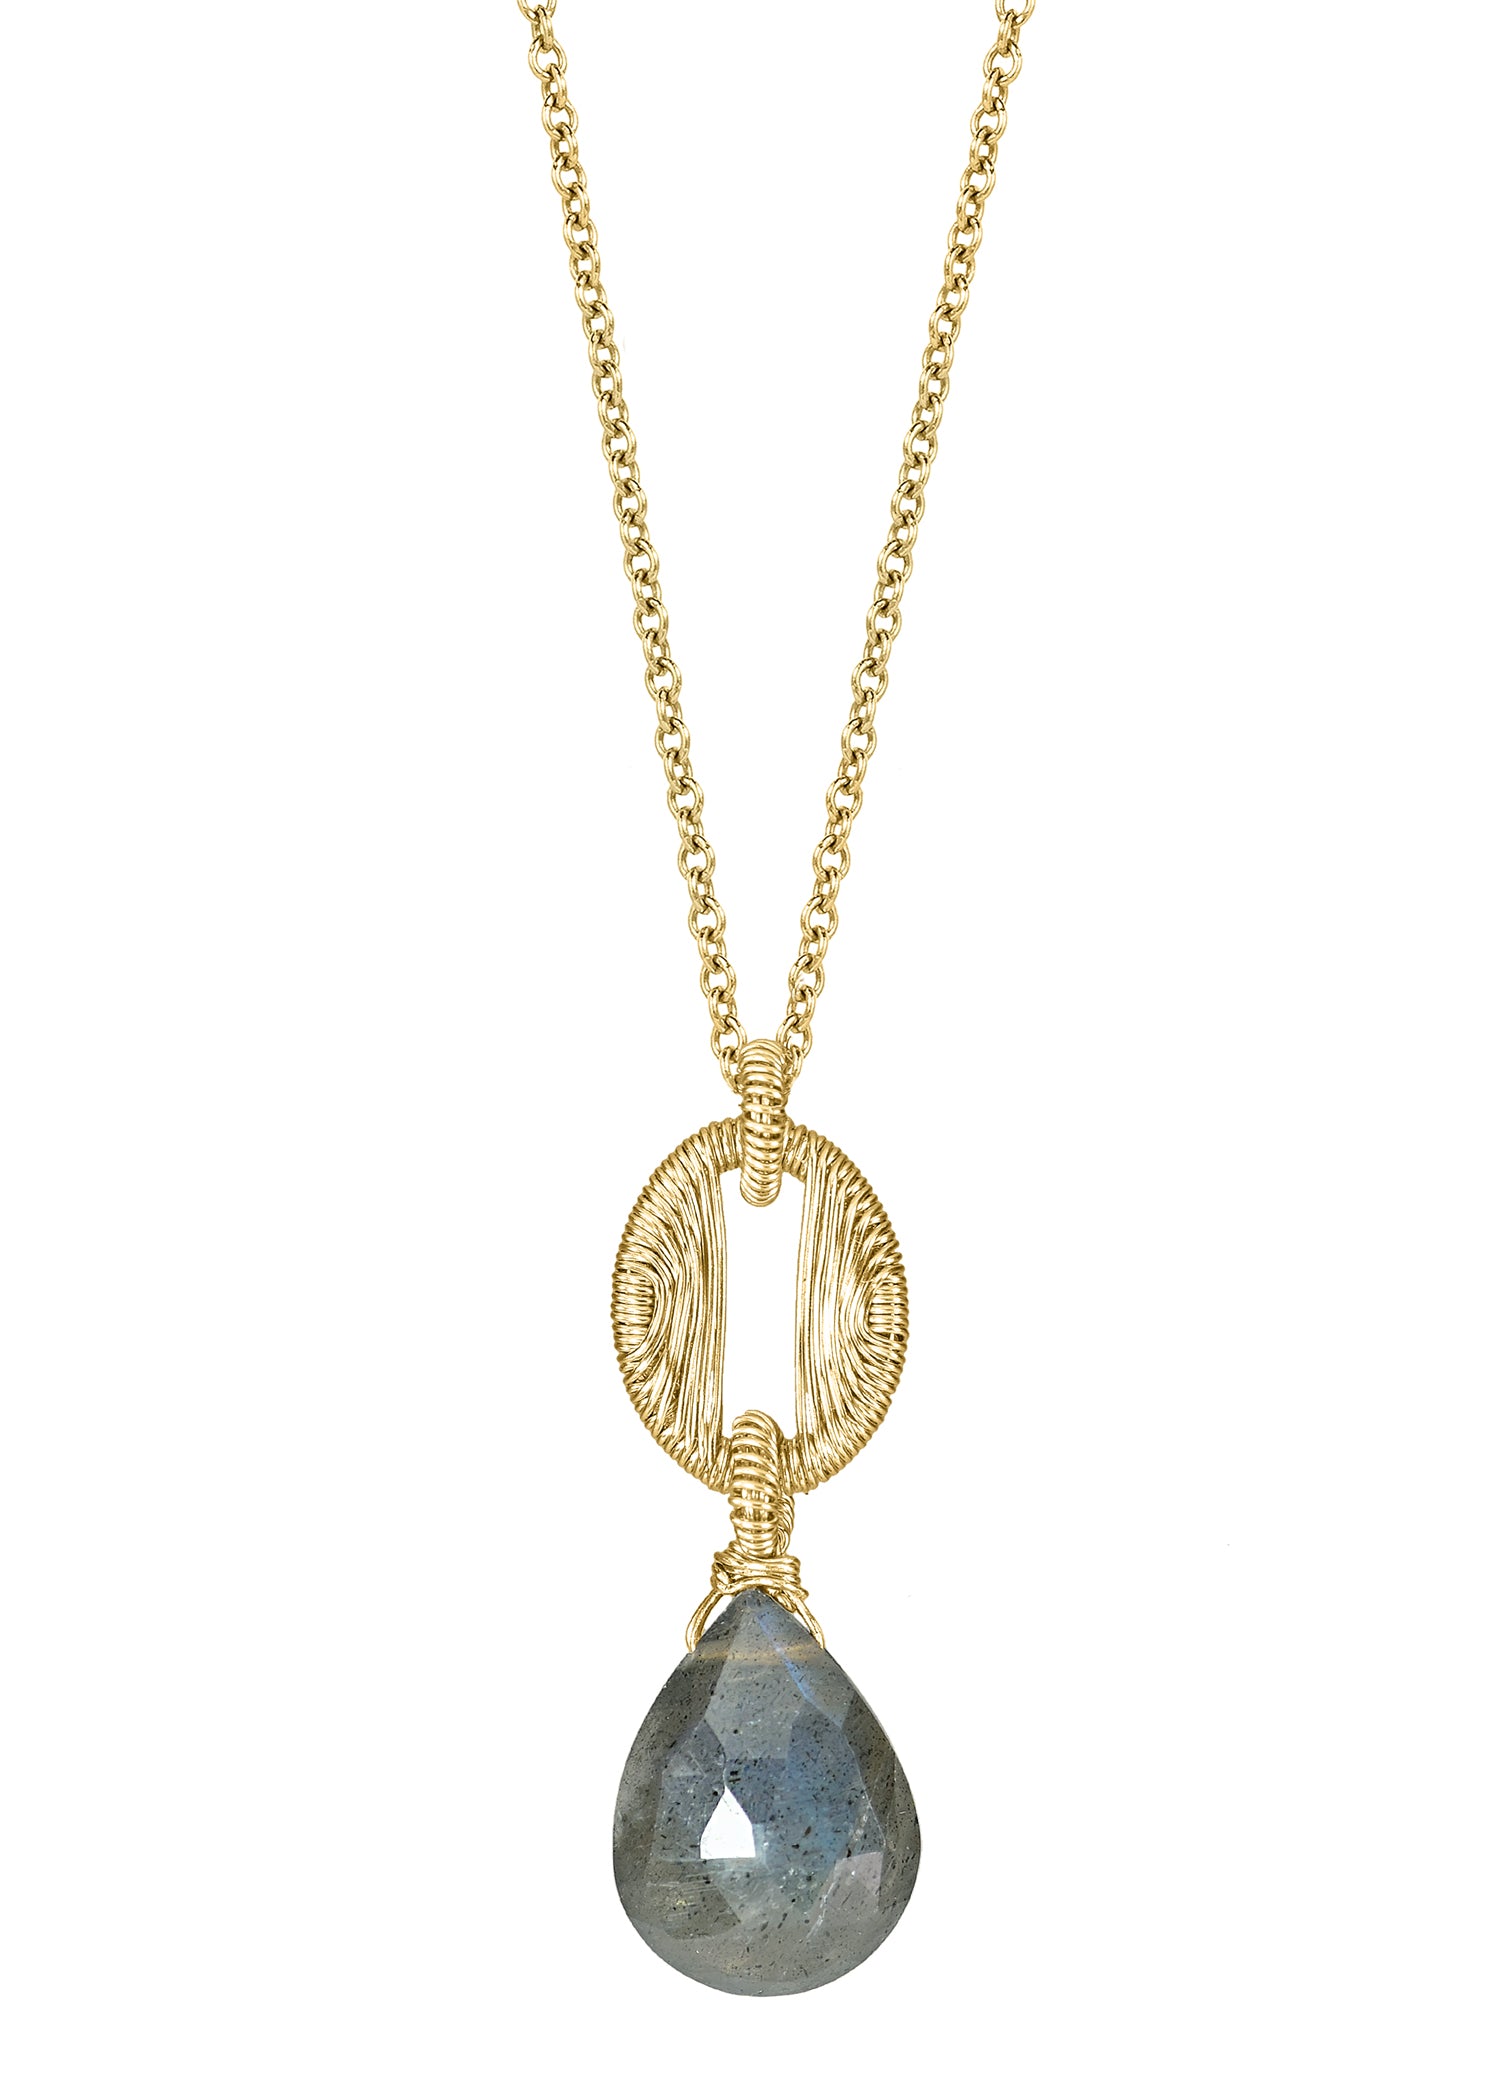 Labradorite 14k gold fill Necklace measures 17-1/4" in length Pendant measures 1-1/8" in length and 3/8" in width at the widest point Handmade in our Los Angeles studio